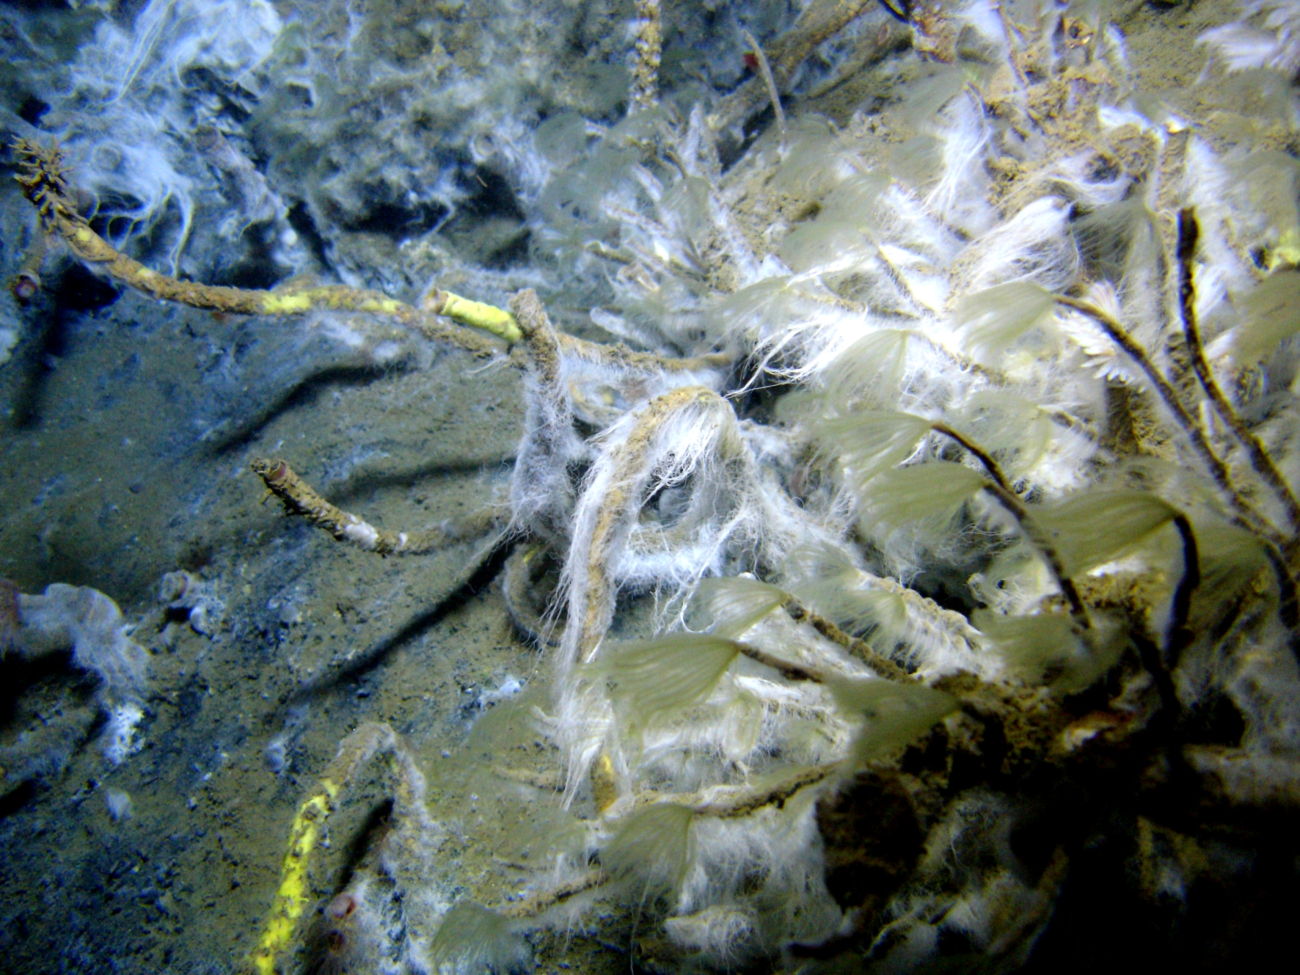 Lamellibrachian tube worms with white filamentous bacterial material at a coldseep site